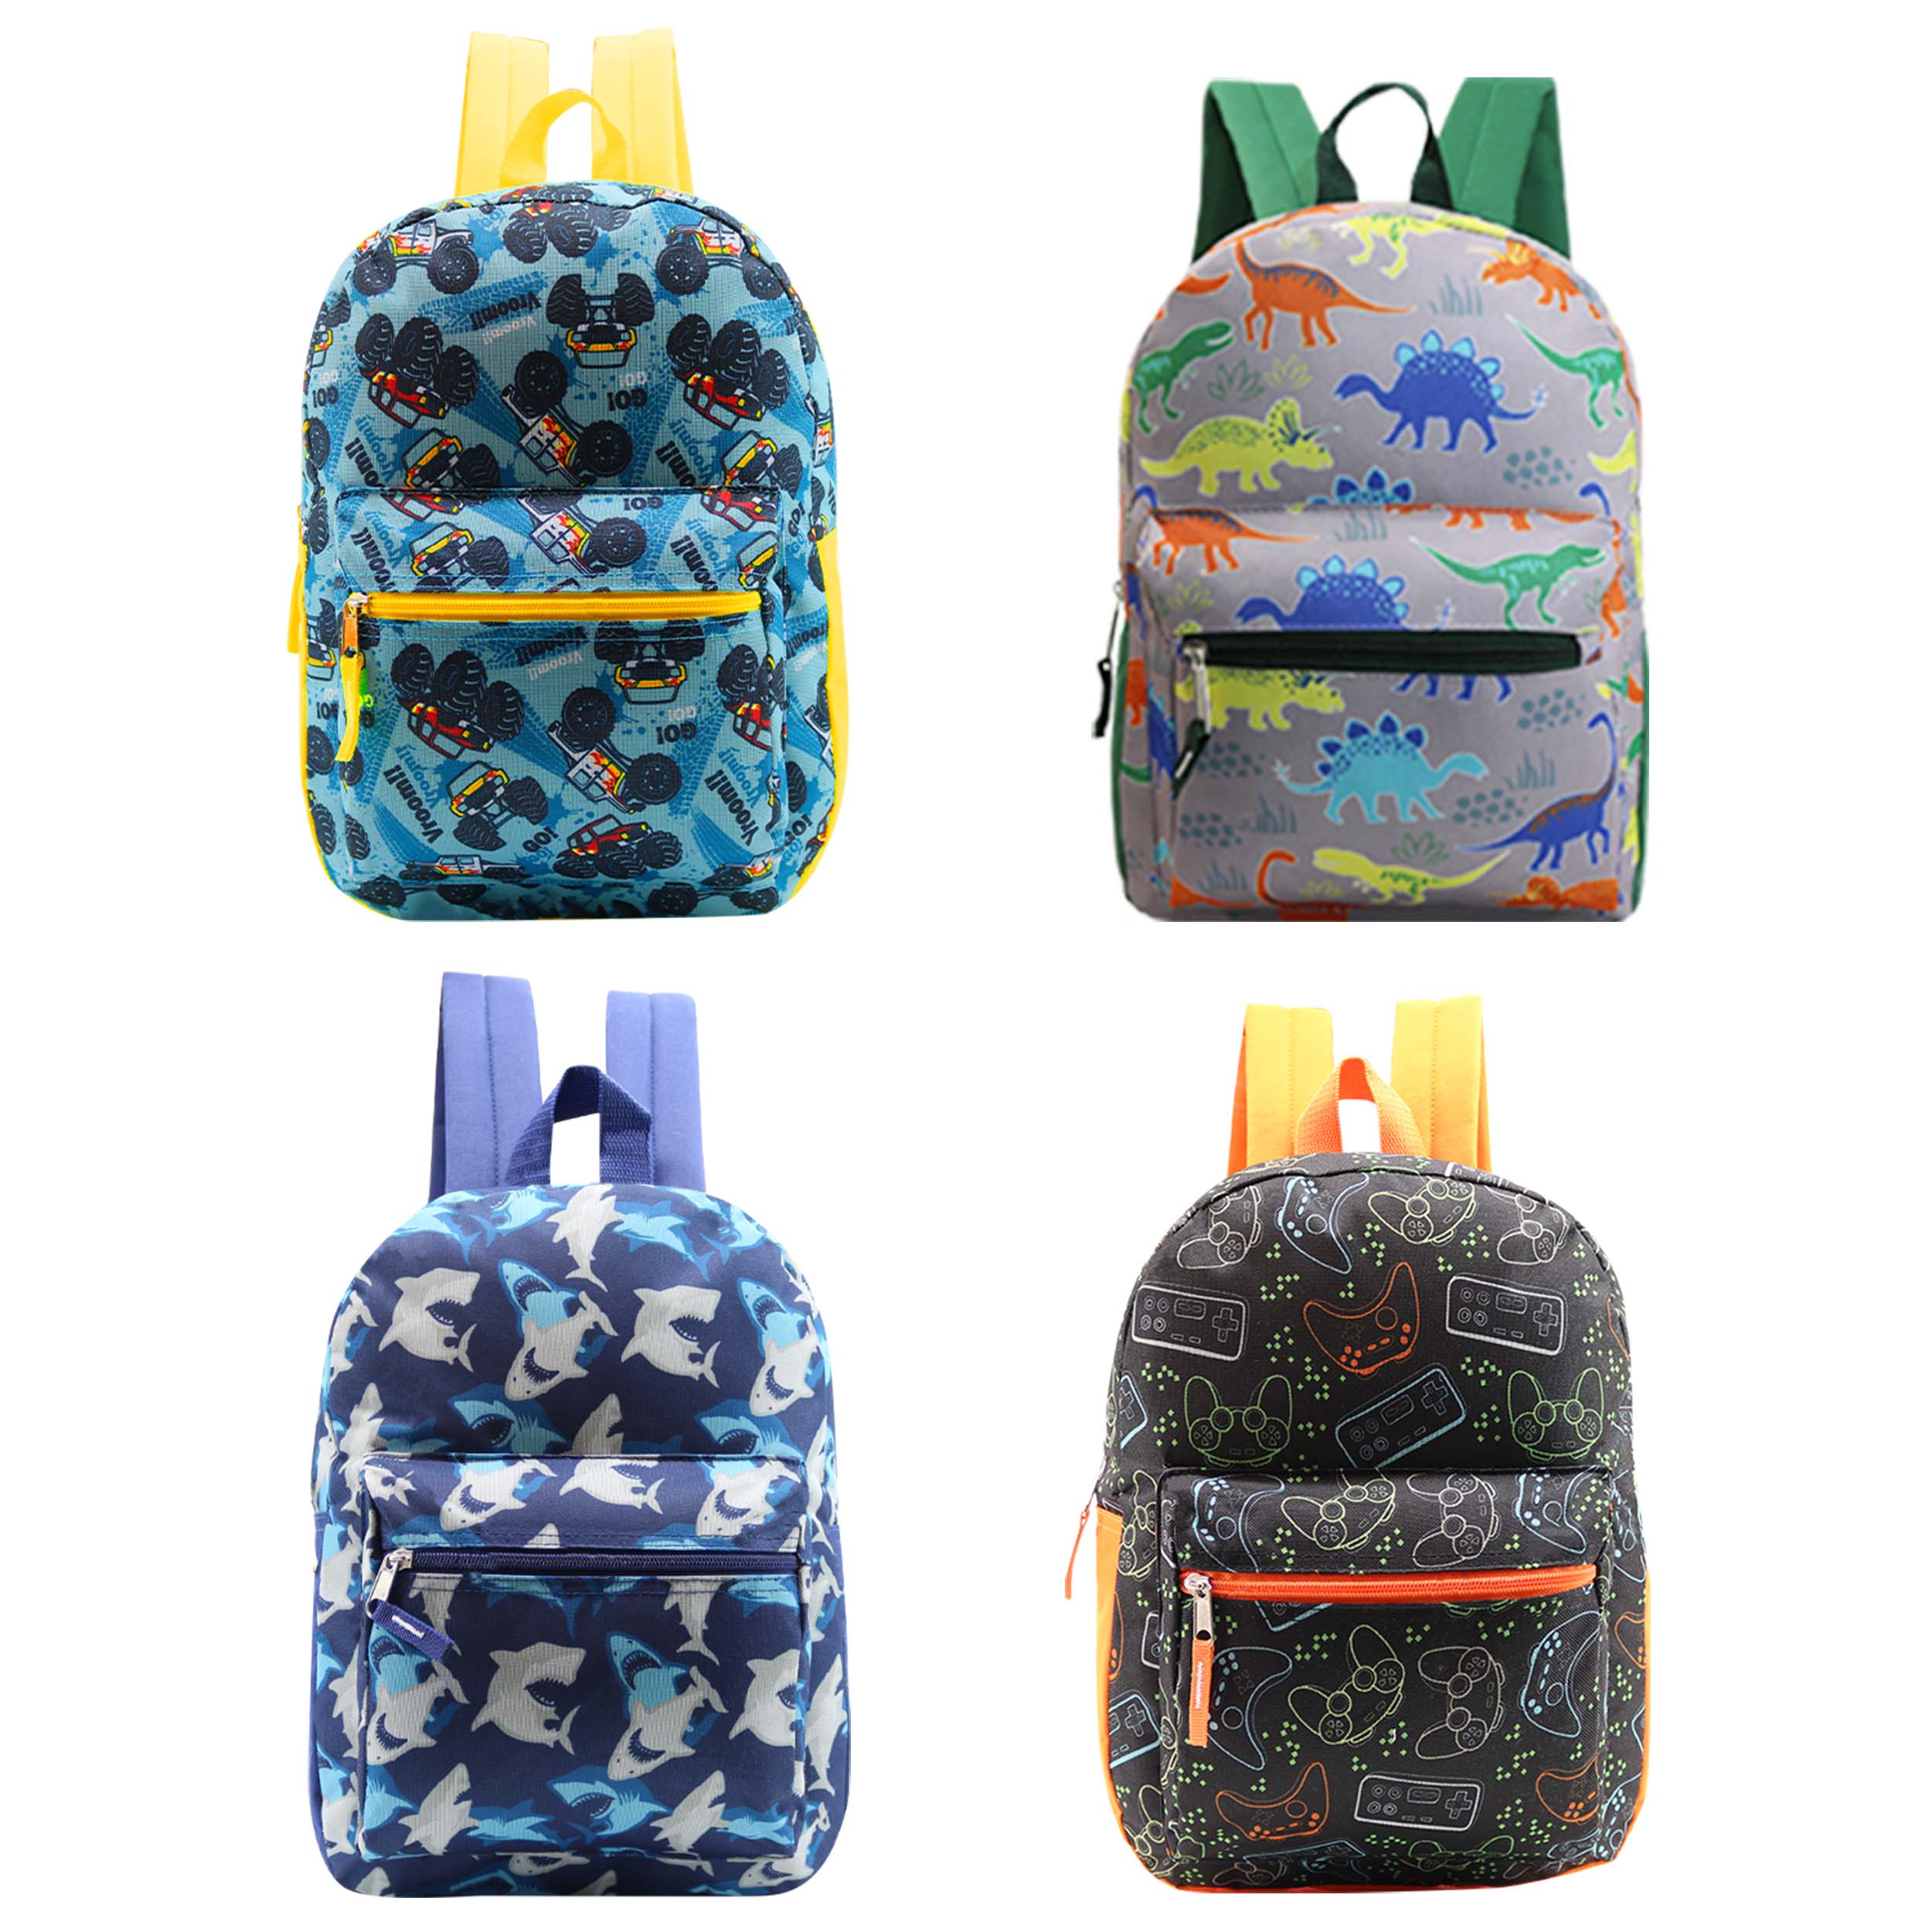 15 inches School Backpacks for Kids In Assorted Prints Bulk School Supplies - Kit Case Of 12